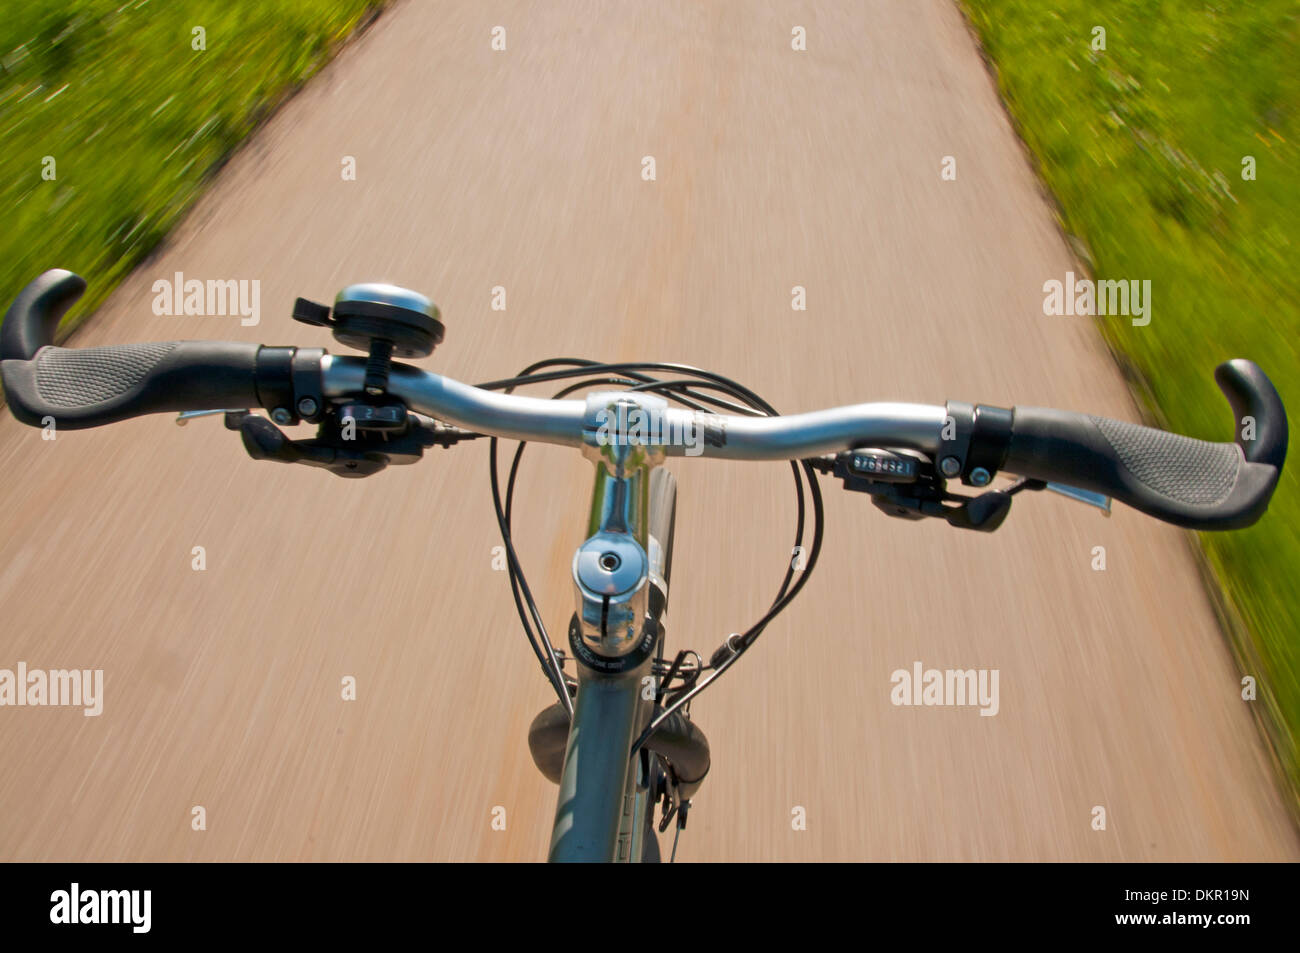 blur biker dynamically Europe biking bicycle bike bicycle excursion cyclist bicycle tour spare time leisure activity bell Stock Photo